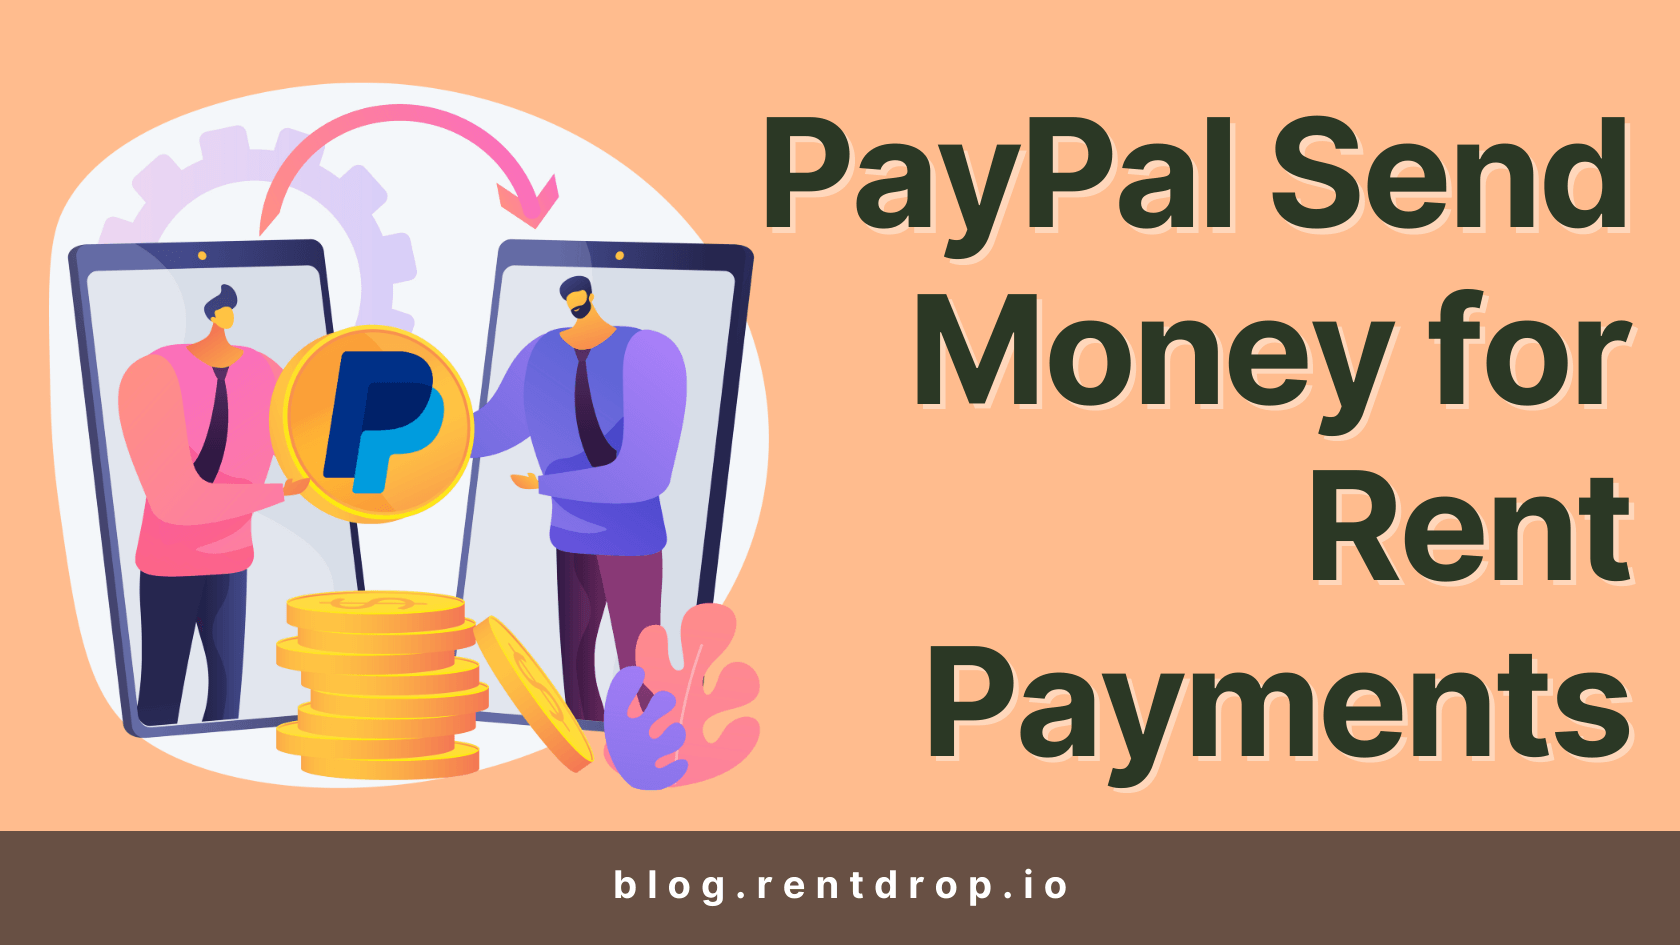 PayPal Send Money for Rent Payments hero image rentdrop